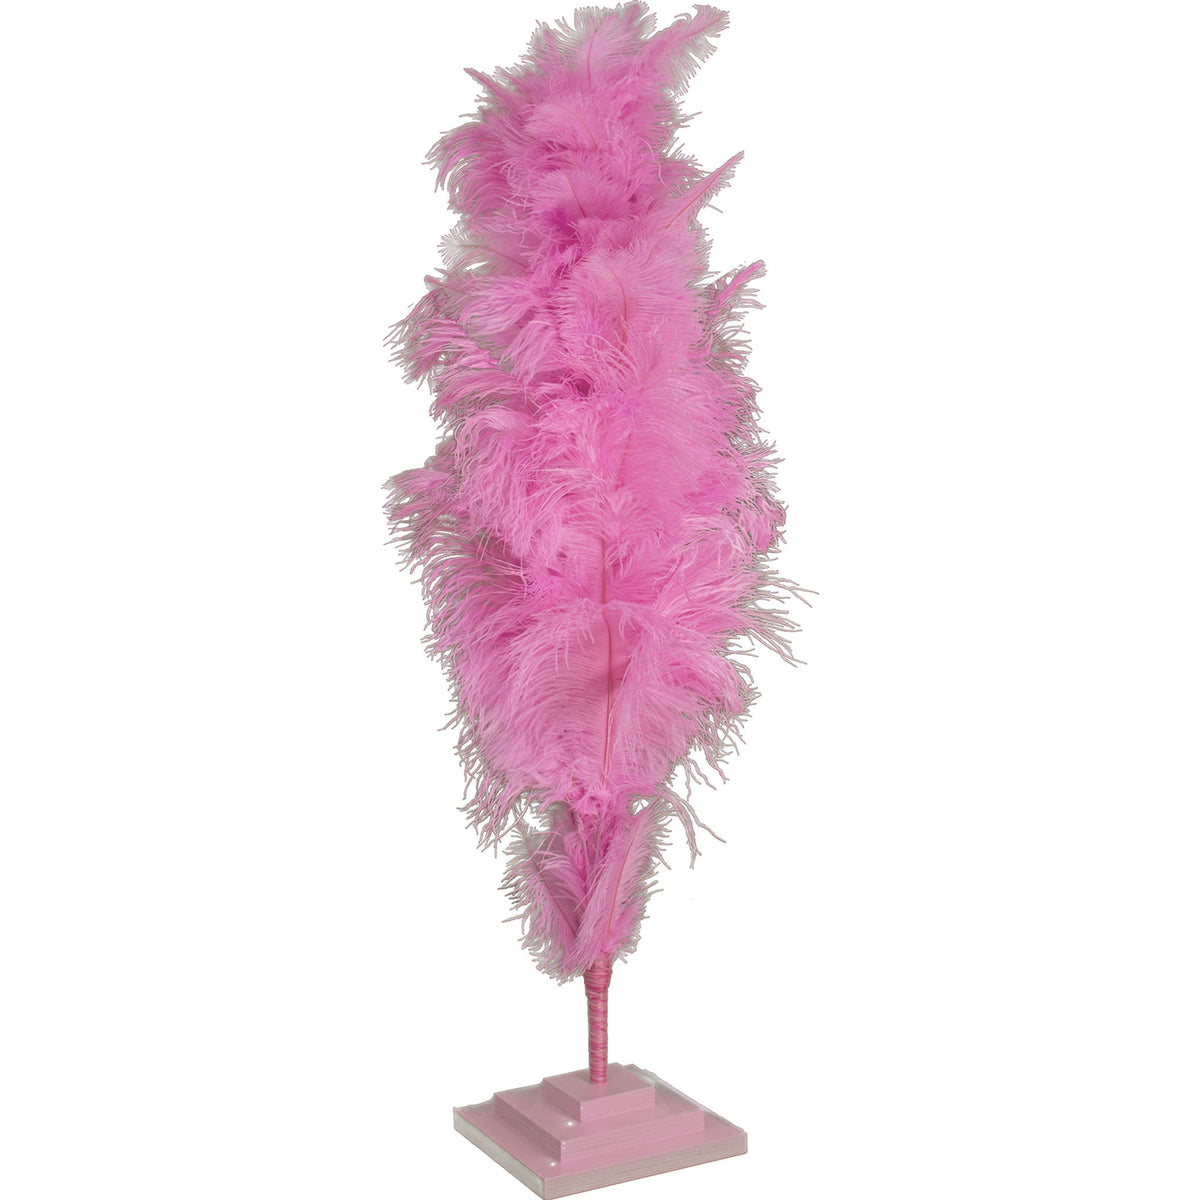 3ft tall pink ostrich feather trees are made for Easy Storage - Strong bendable wire can be wrapped into any type of storage box